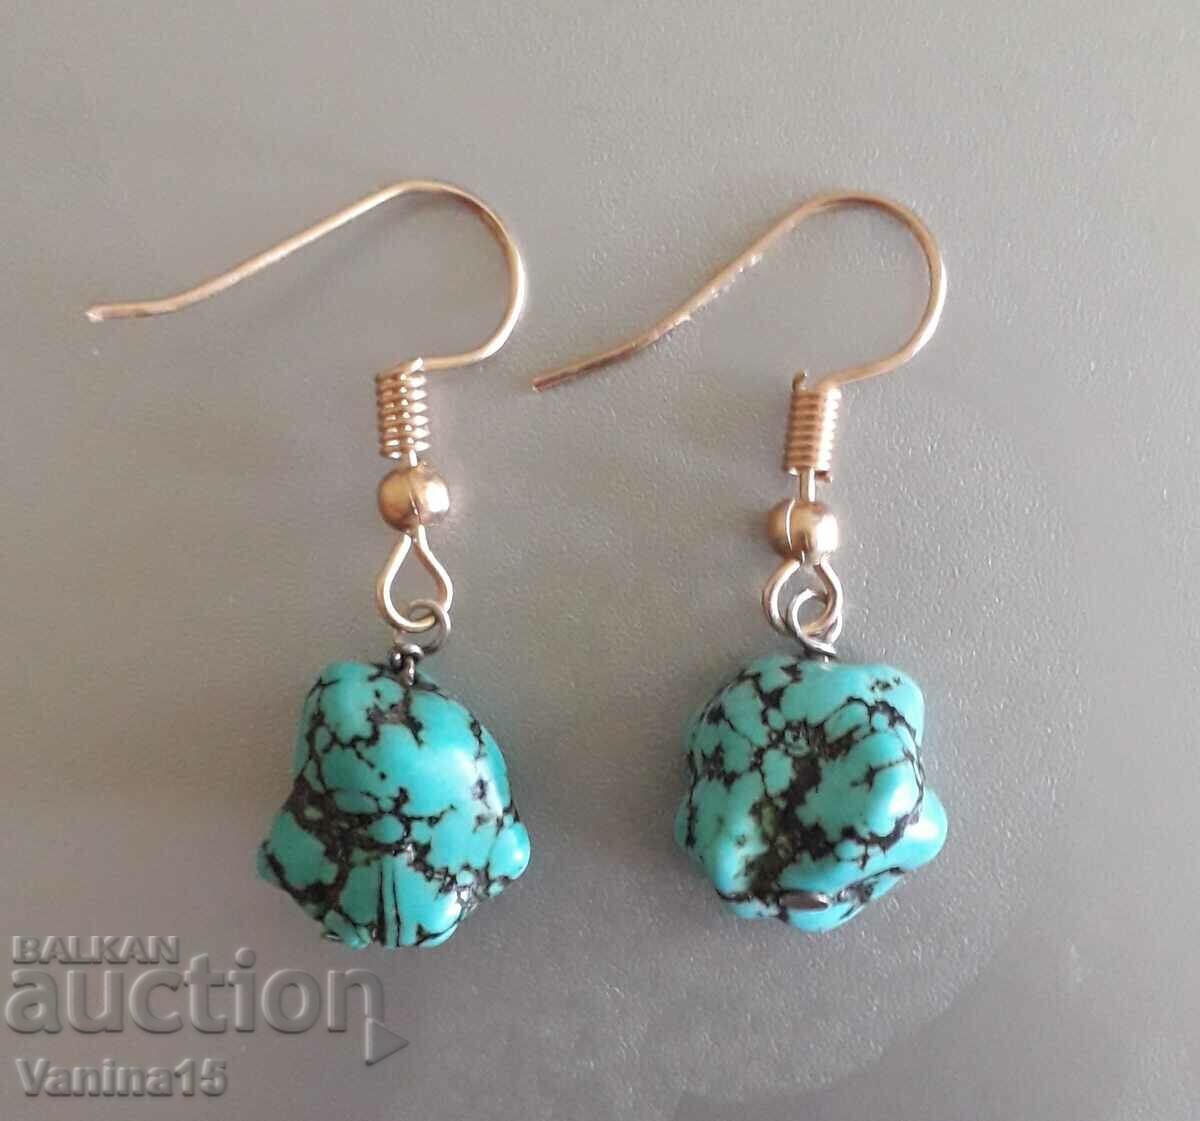 Imported turquoise earrings